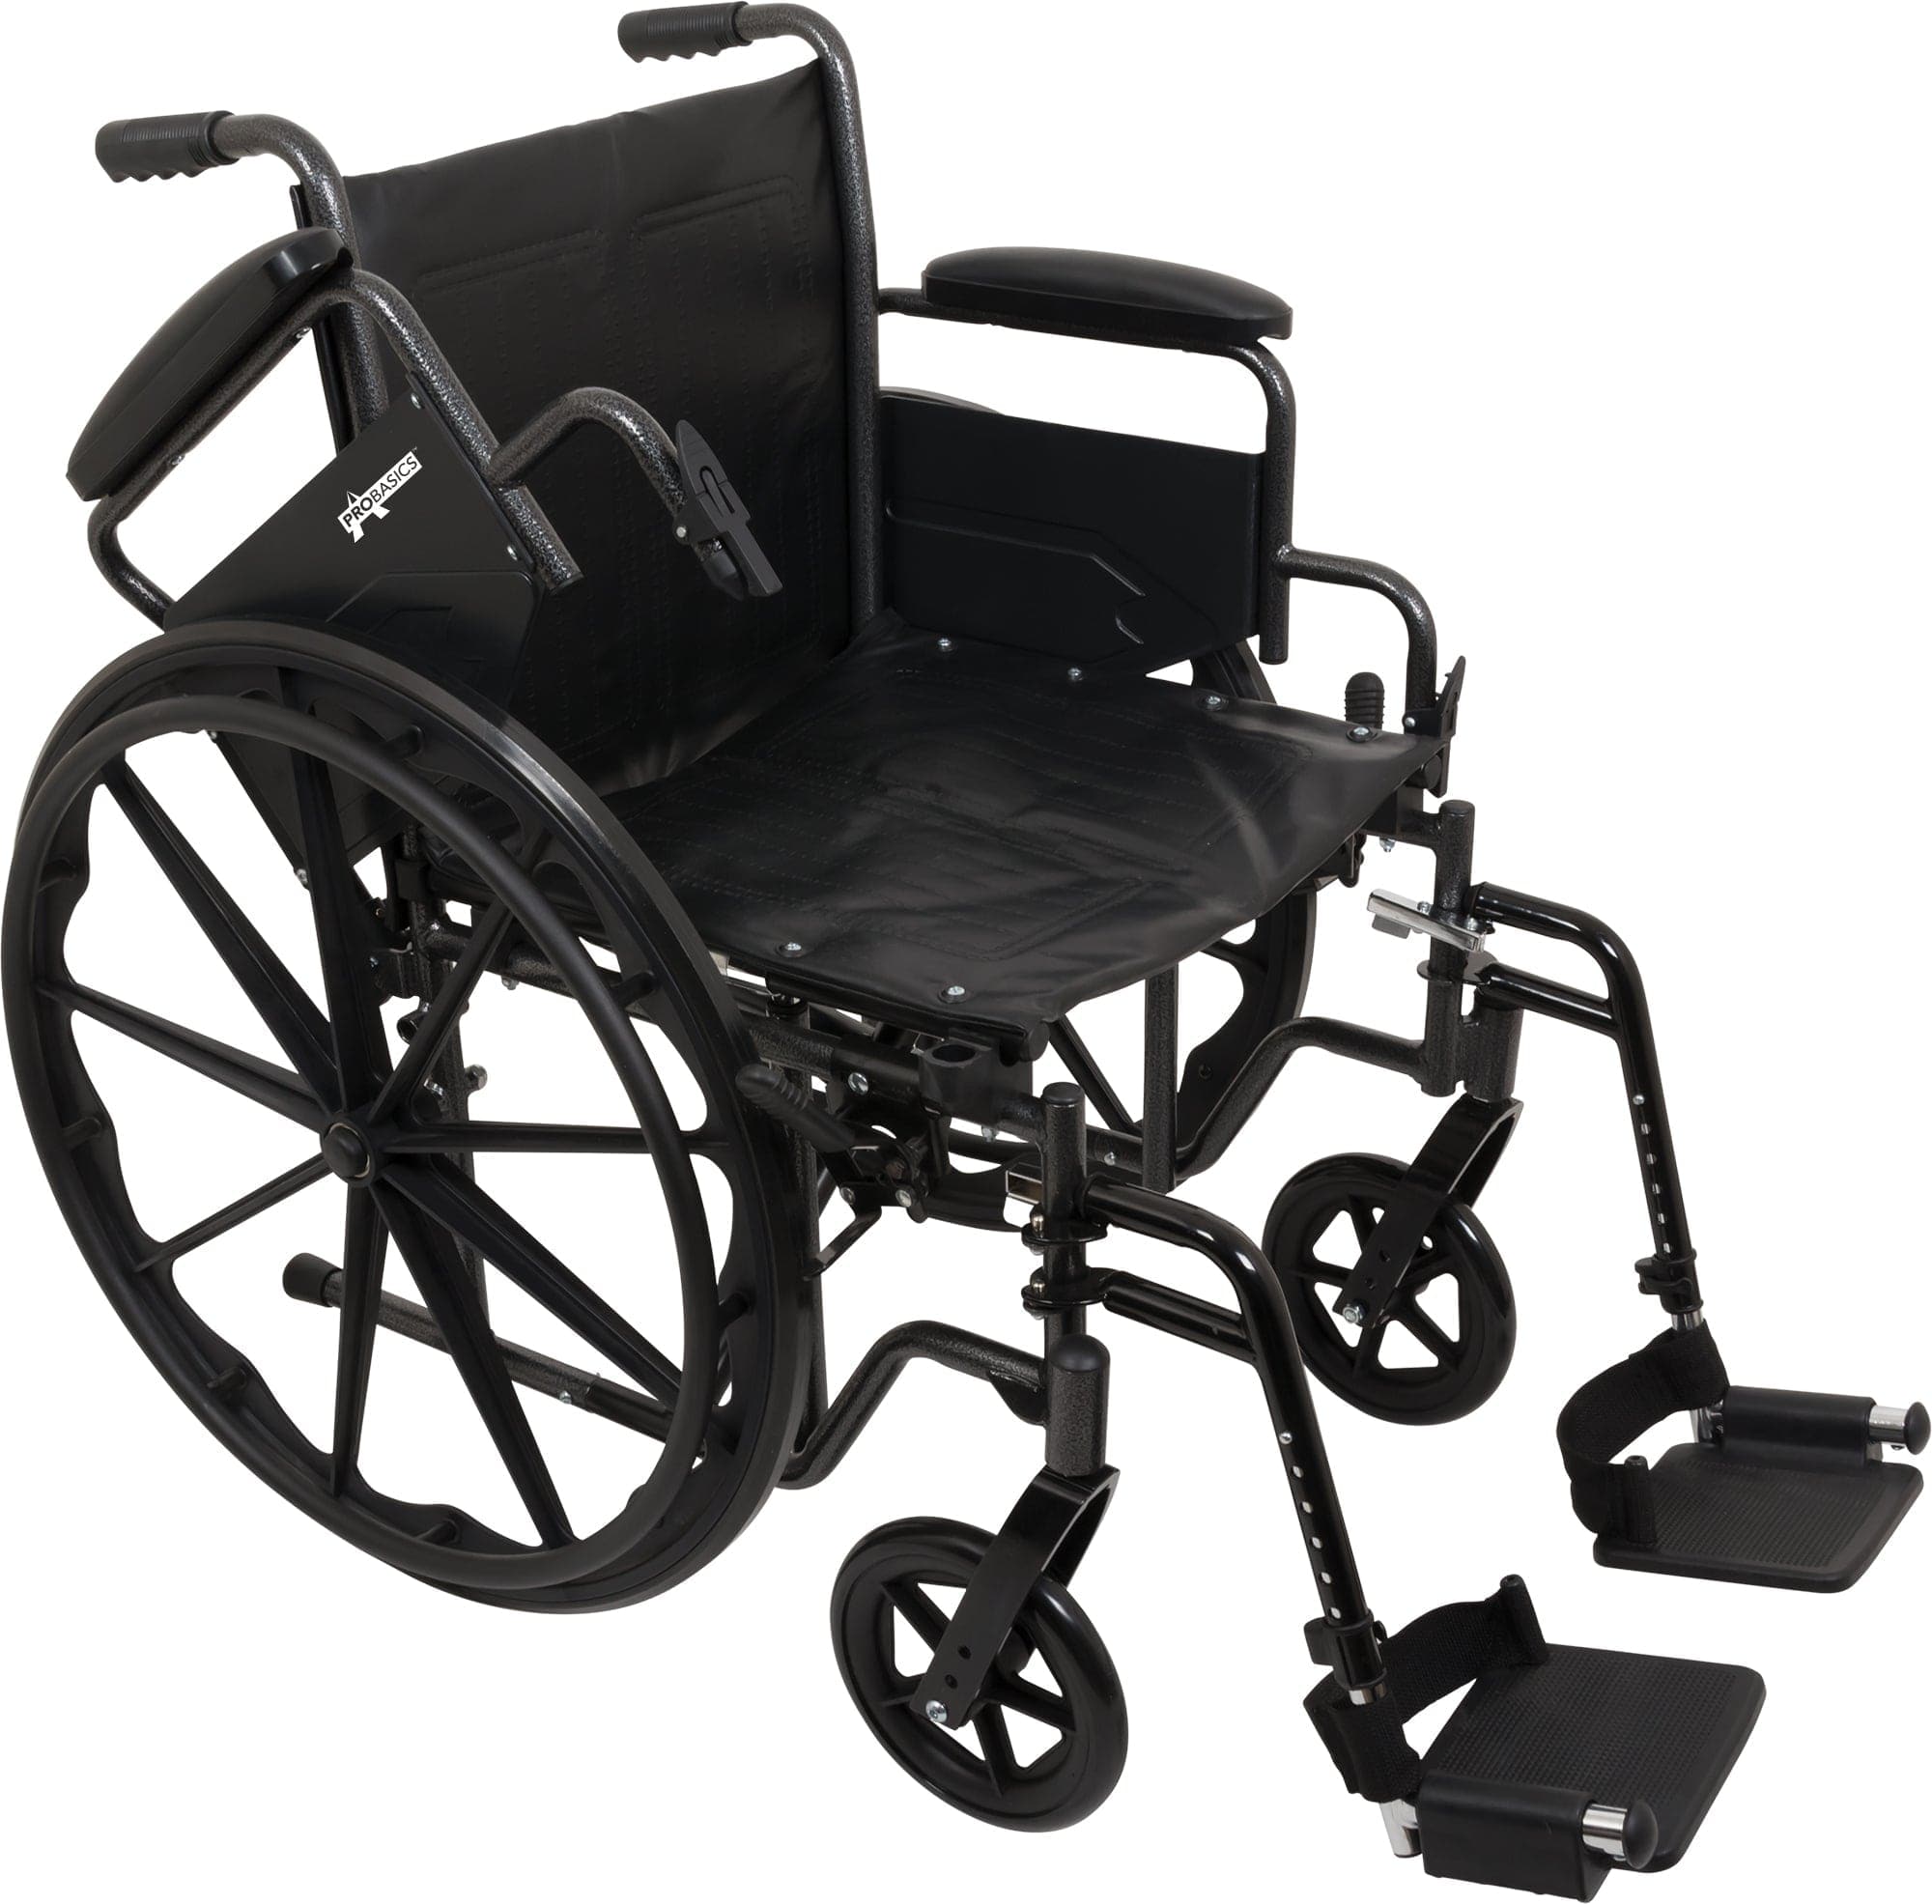 Compass Health K2 Wheelchairs Compass Health ProBasics K2 Wheelchair with 16" x 16" Seat and Swing-Away Footrests